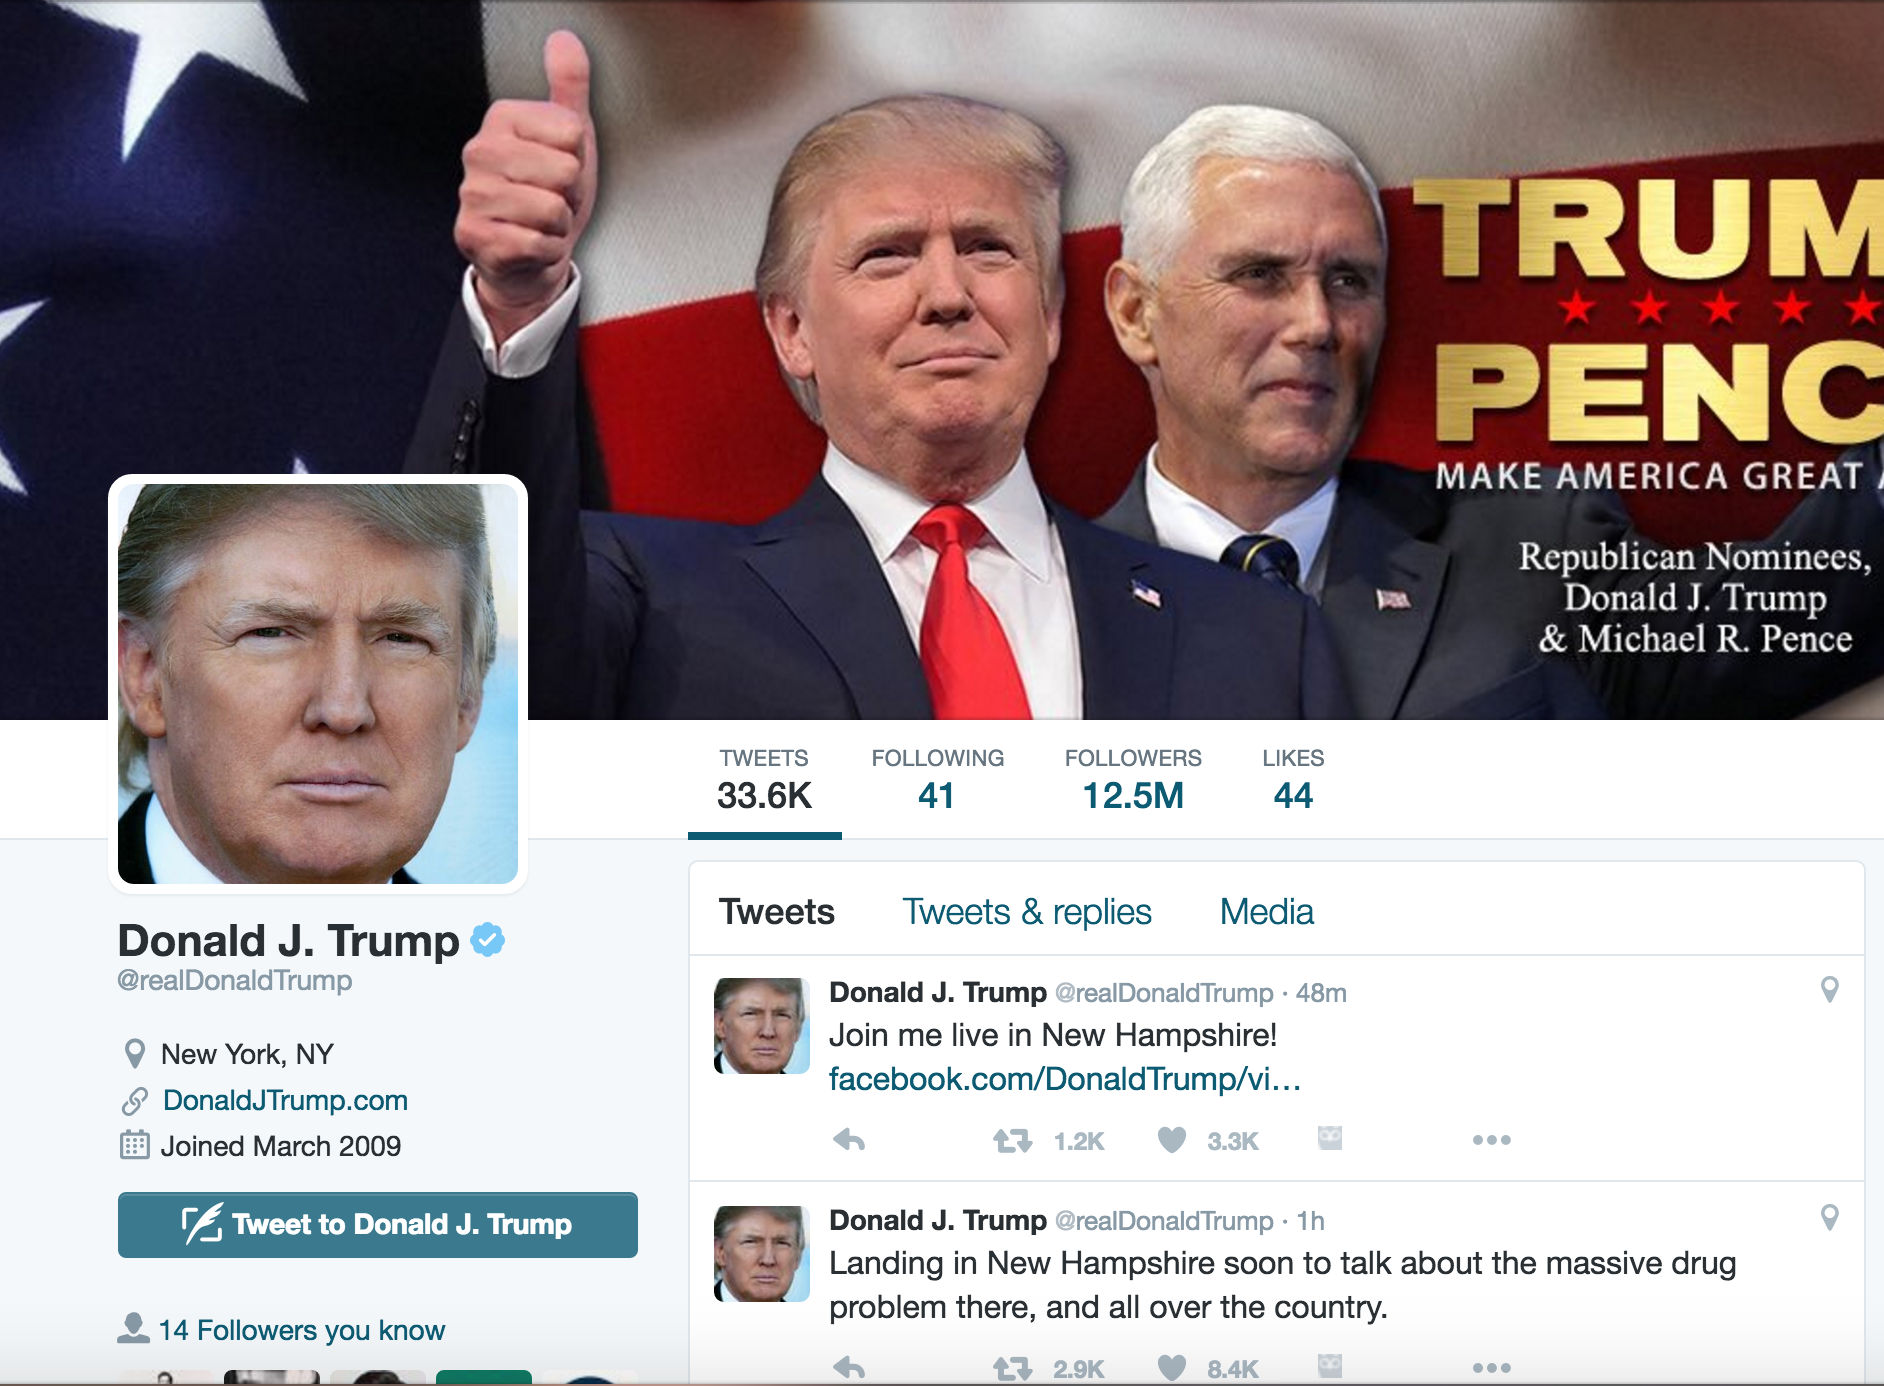 Screenshot from Trump's official Twitter account